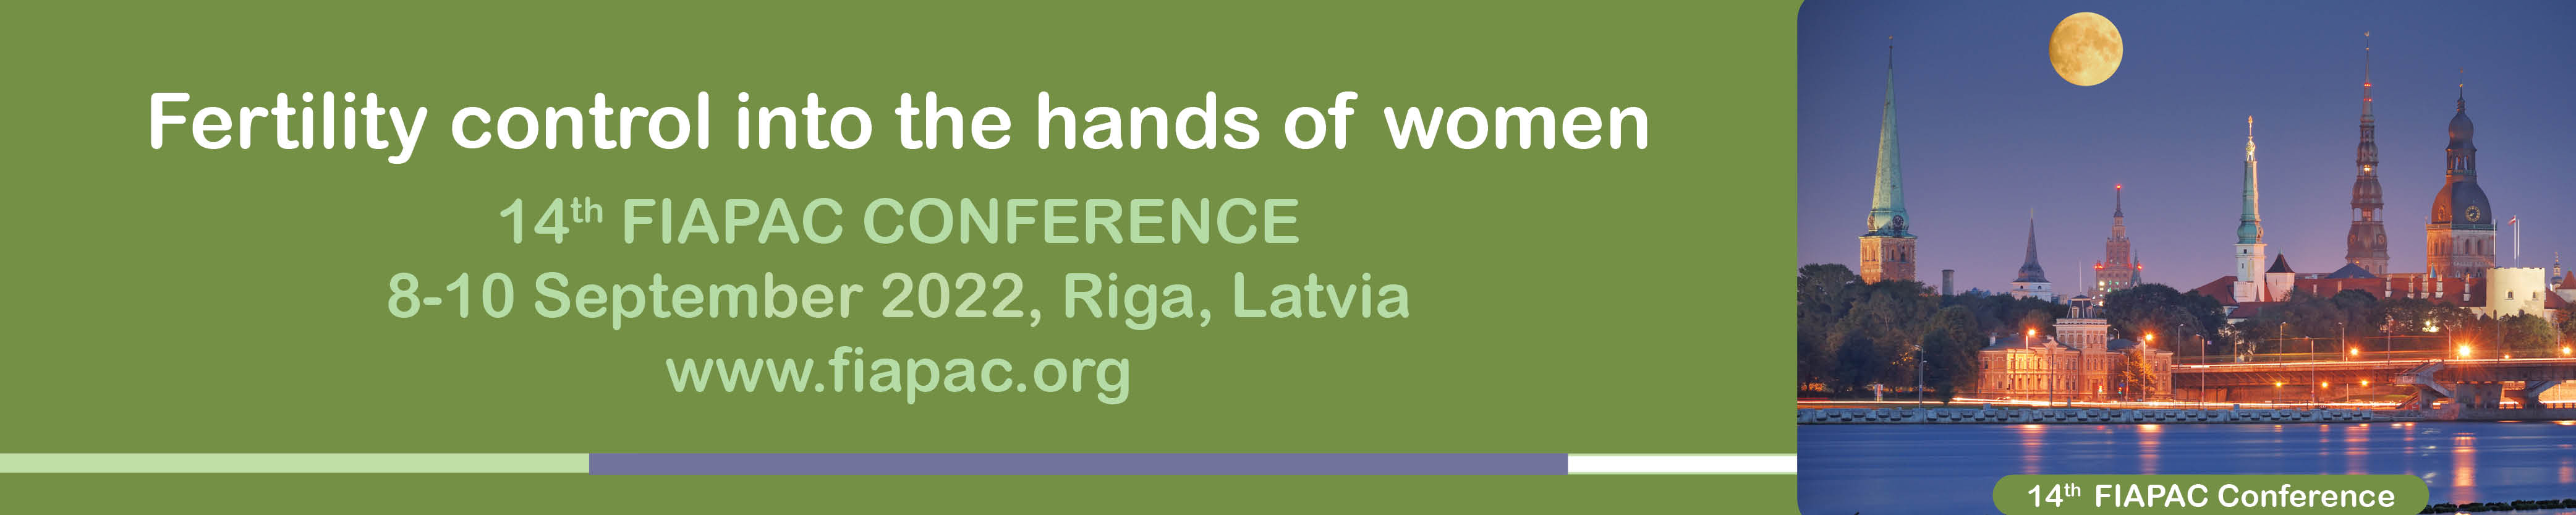 14th Conference of the International Federation of Abortion and Contraception Professionals, Riga, Latvia